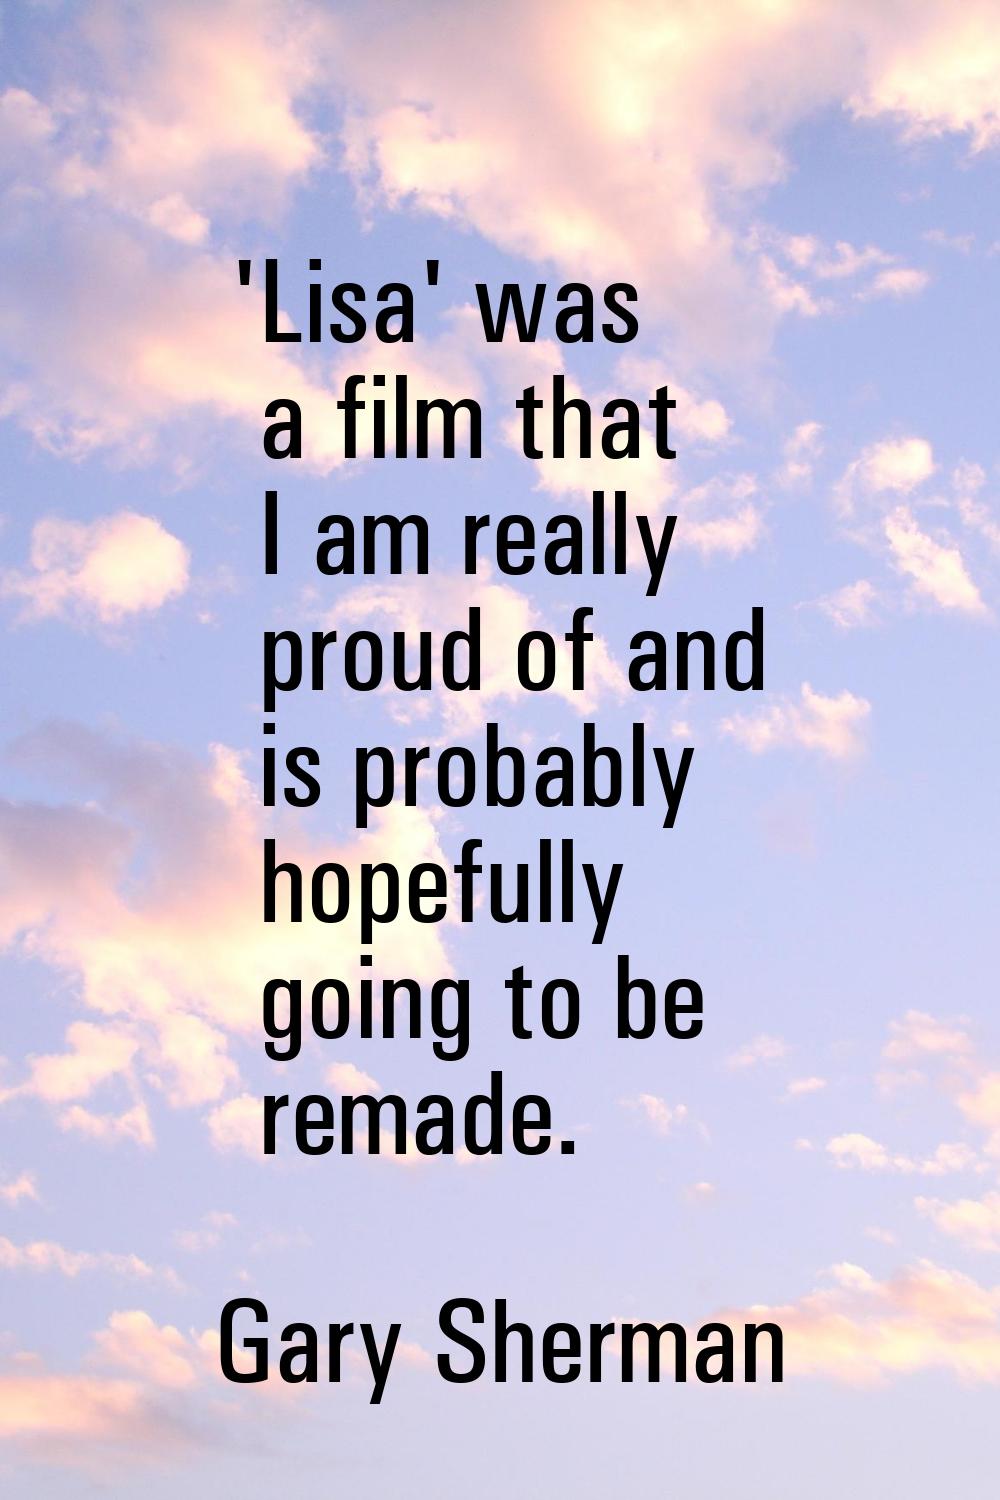 'Lisa' was a film that I am really proud of and is probably hopefully going to be remade.